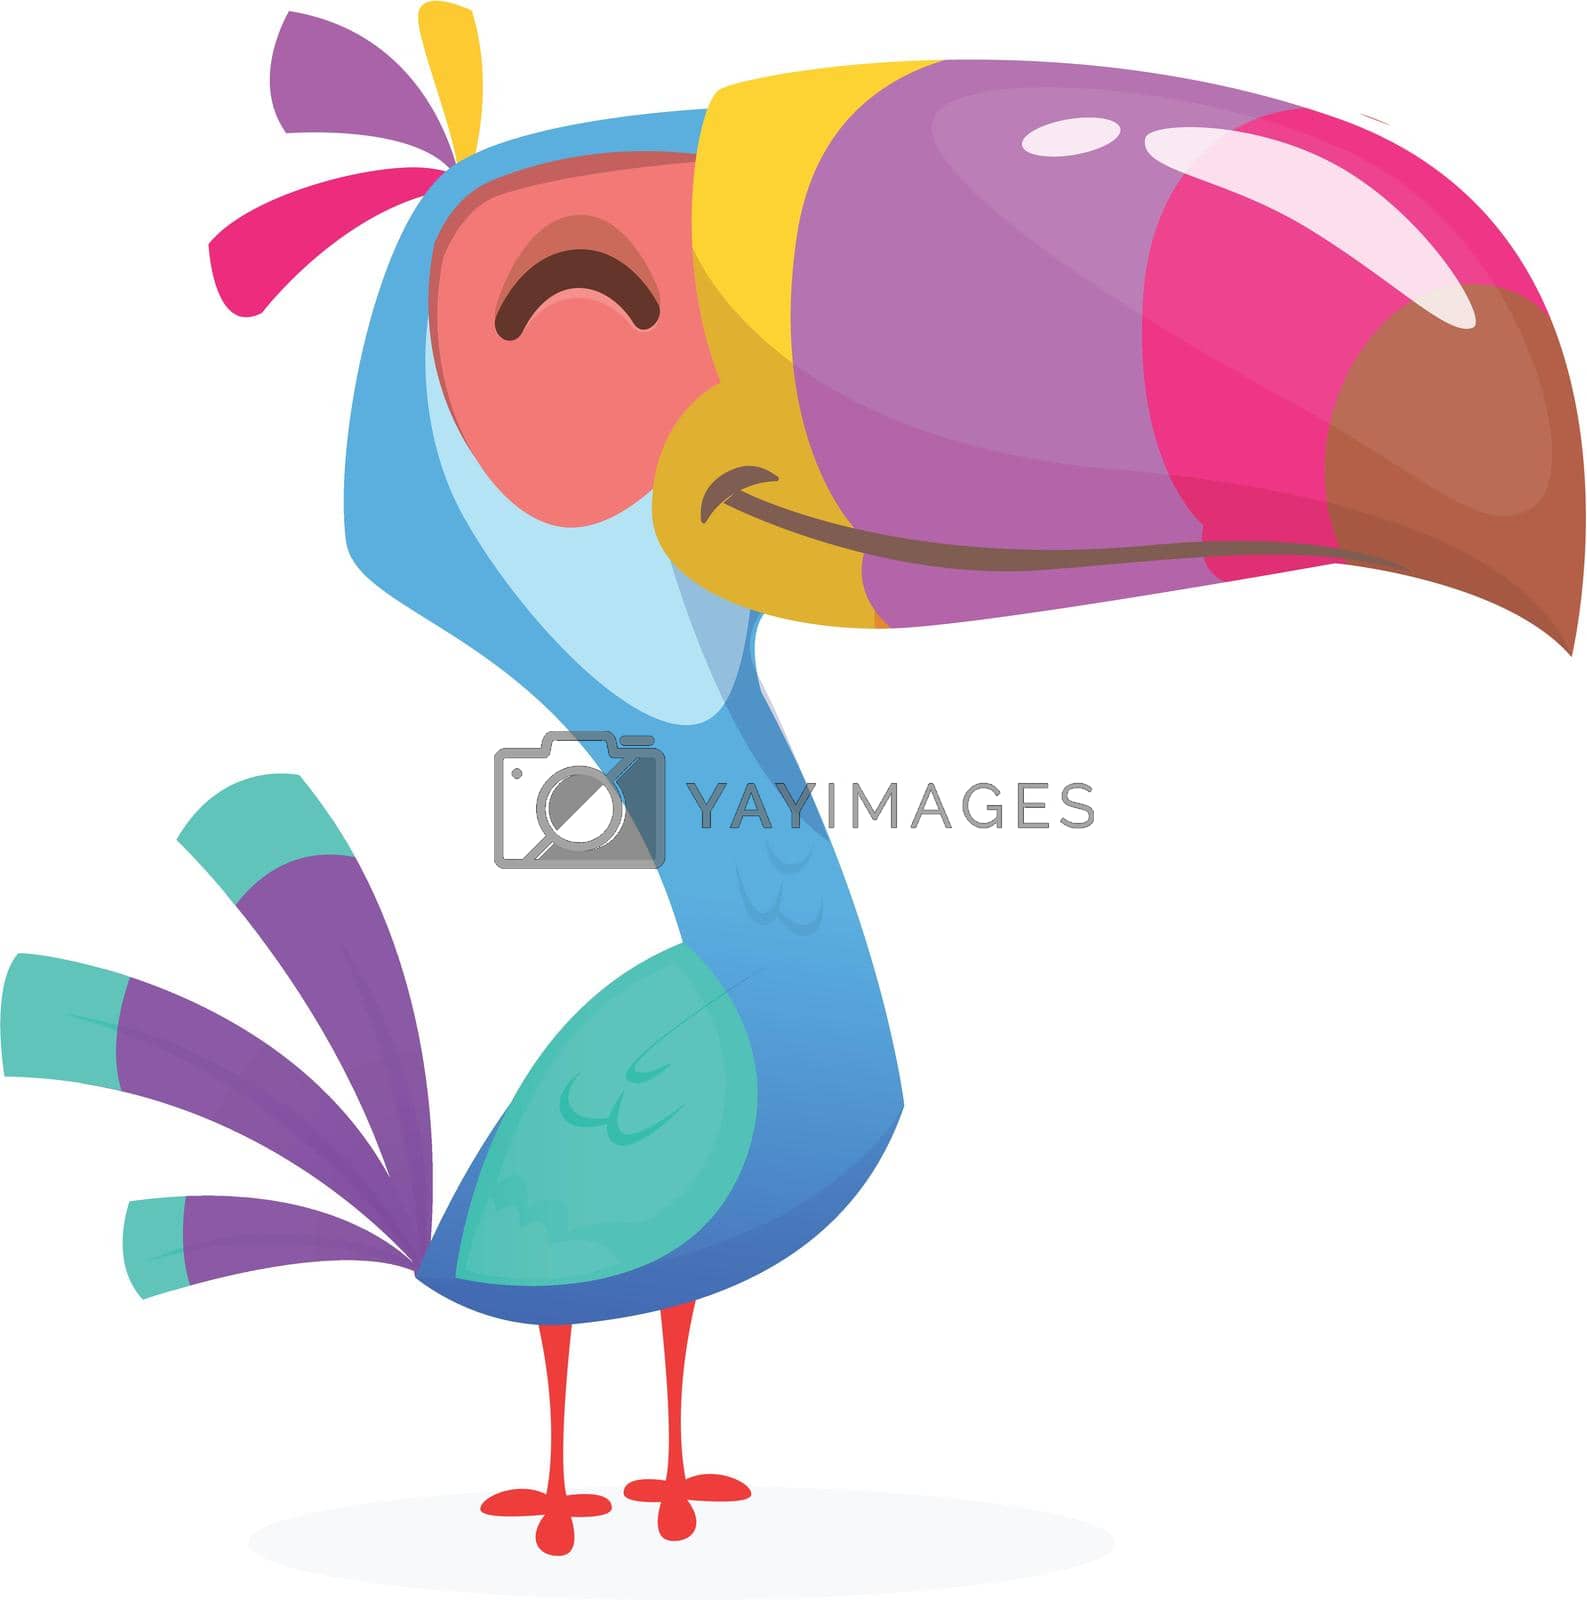 Royalty free image of Toucan cartoon. Vector toucan bird. Exotic colorful bird illustration by drawkman